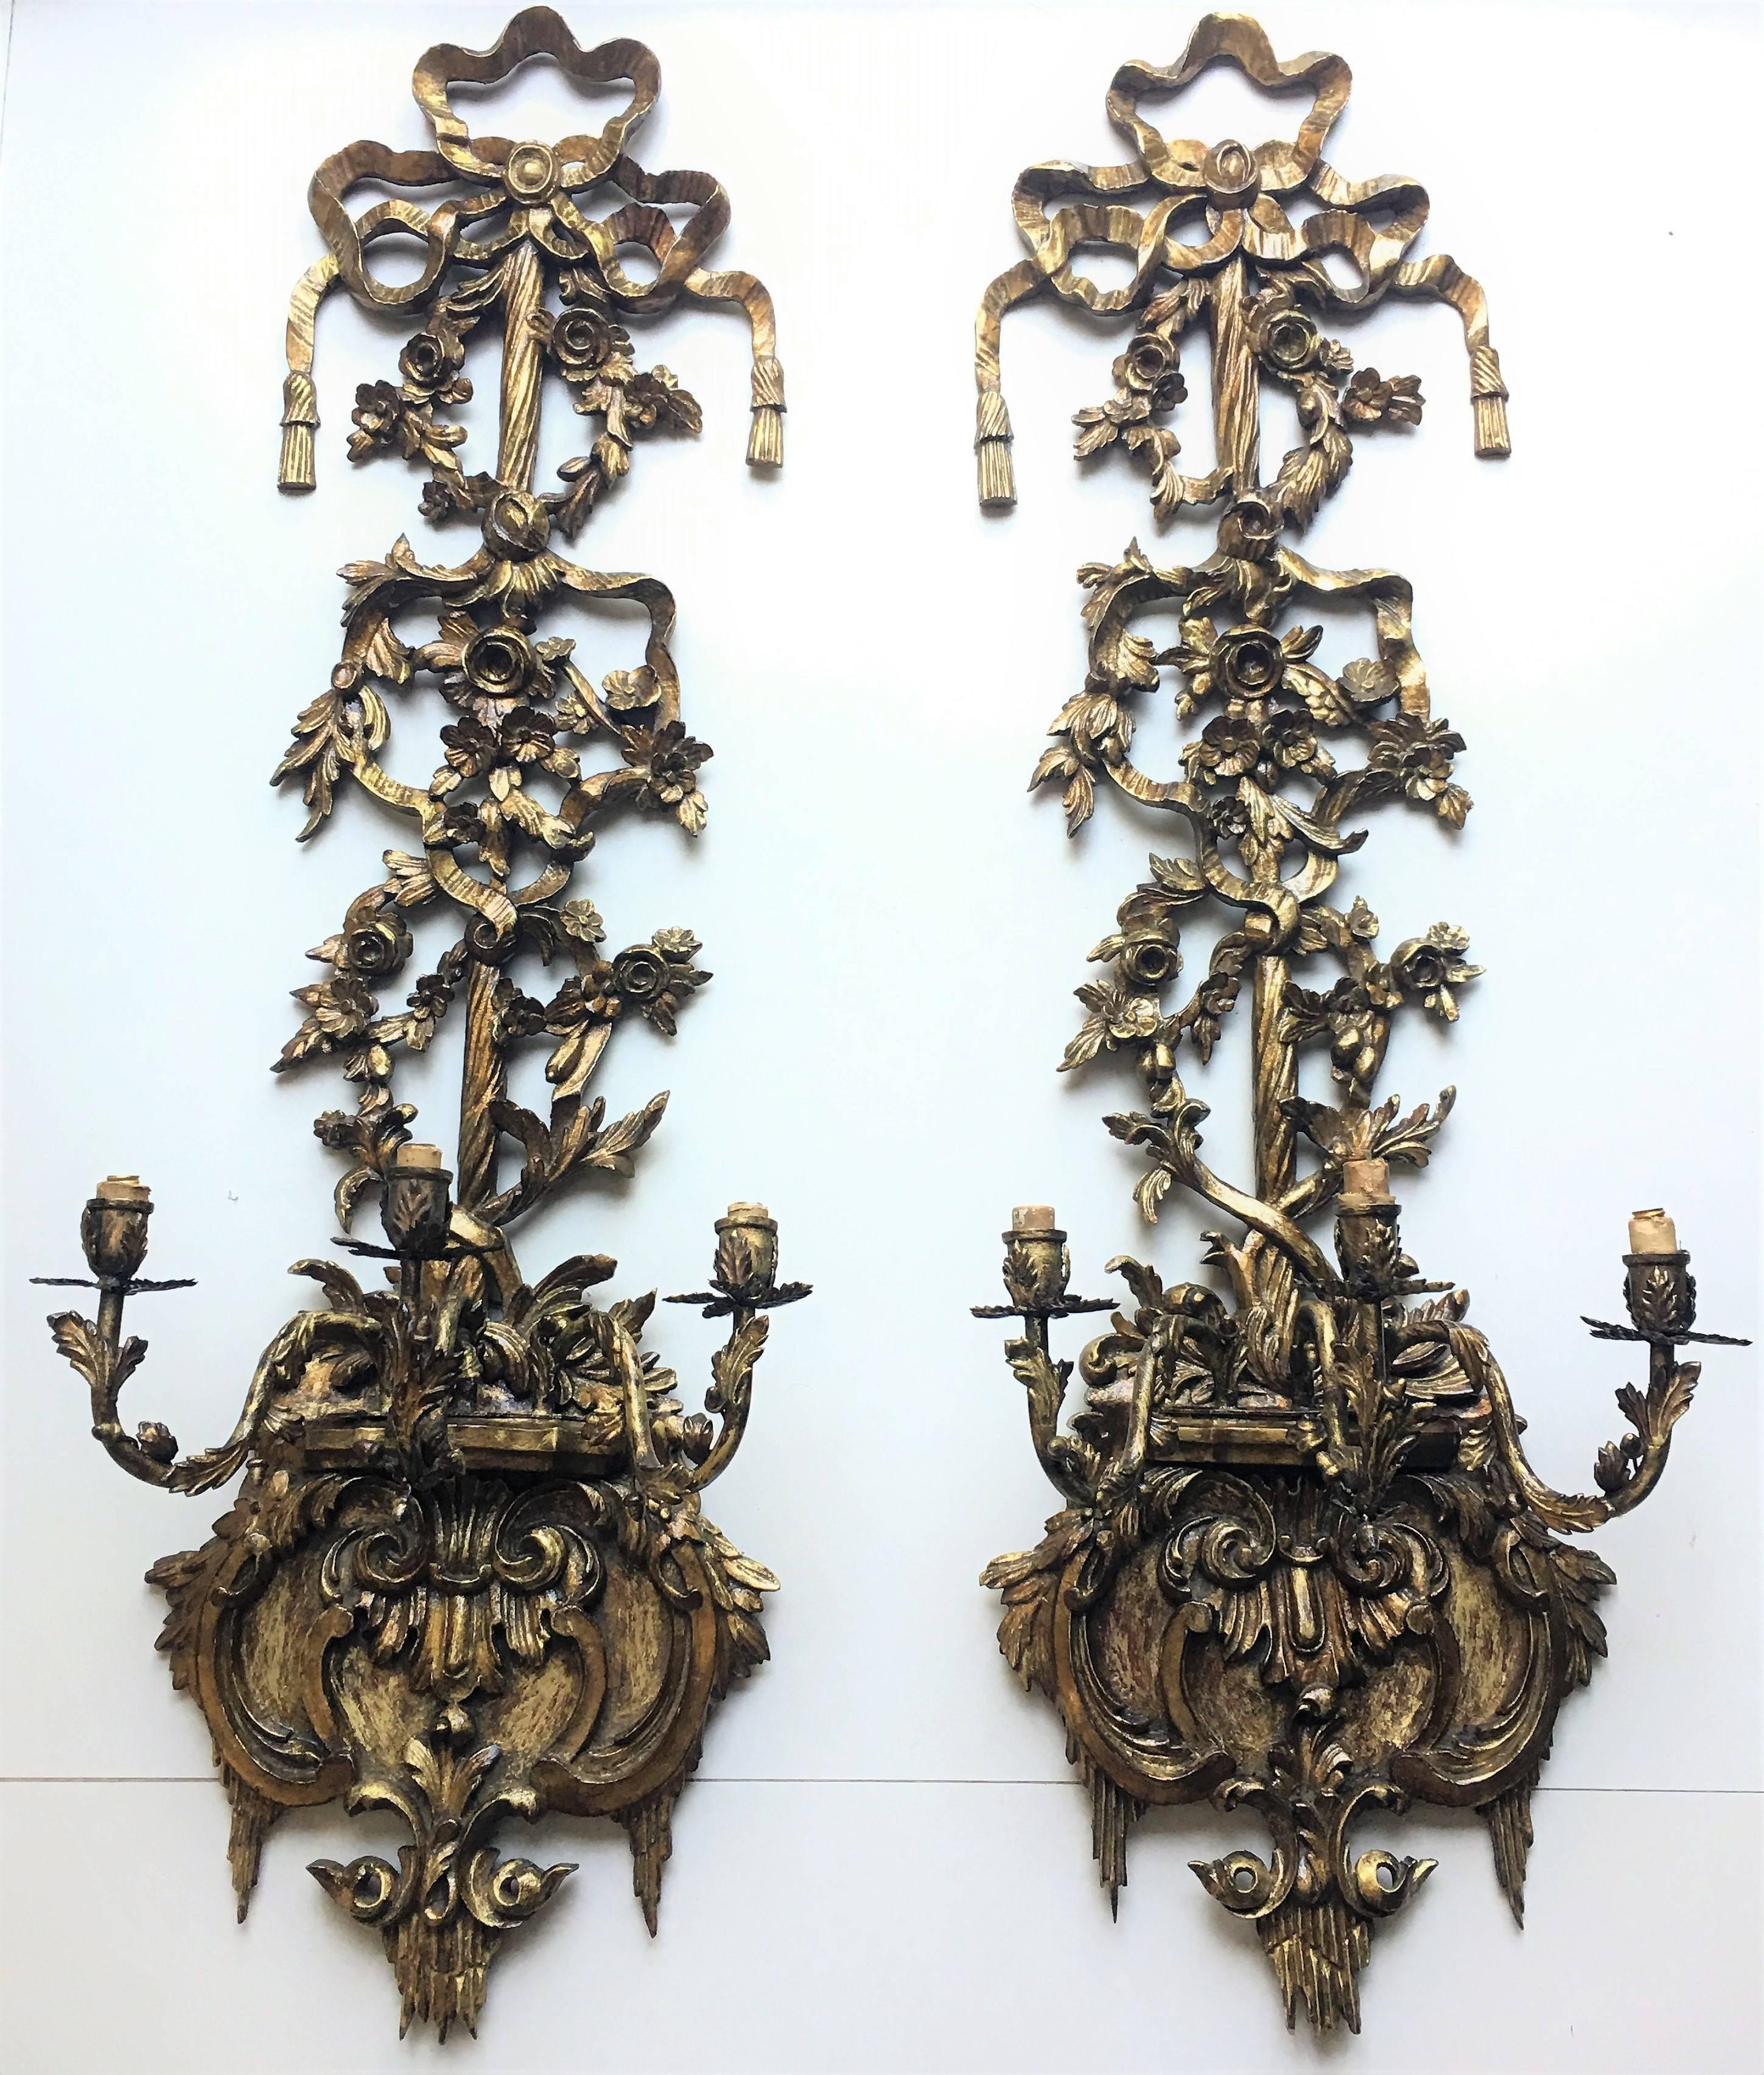 This monumental pair of three-light sconces is hand-carved gilded gold. The delicate ribbon winds upward from the candle cups and ties the bundle of wheat sheaves, ending in a crowning bow. The carvings are superbly detailed, and reminds one of the